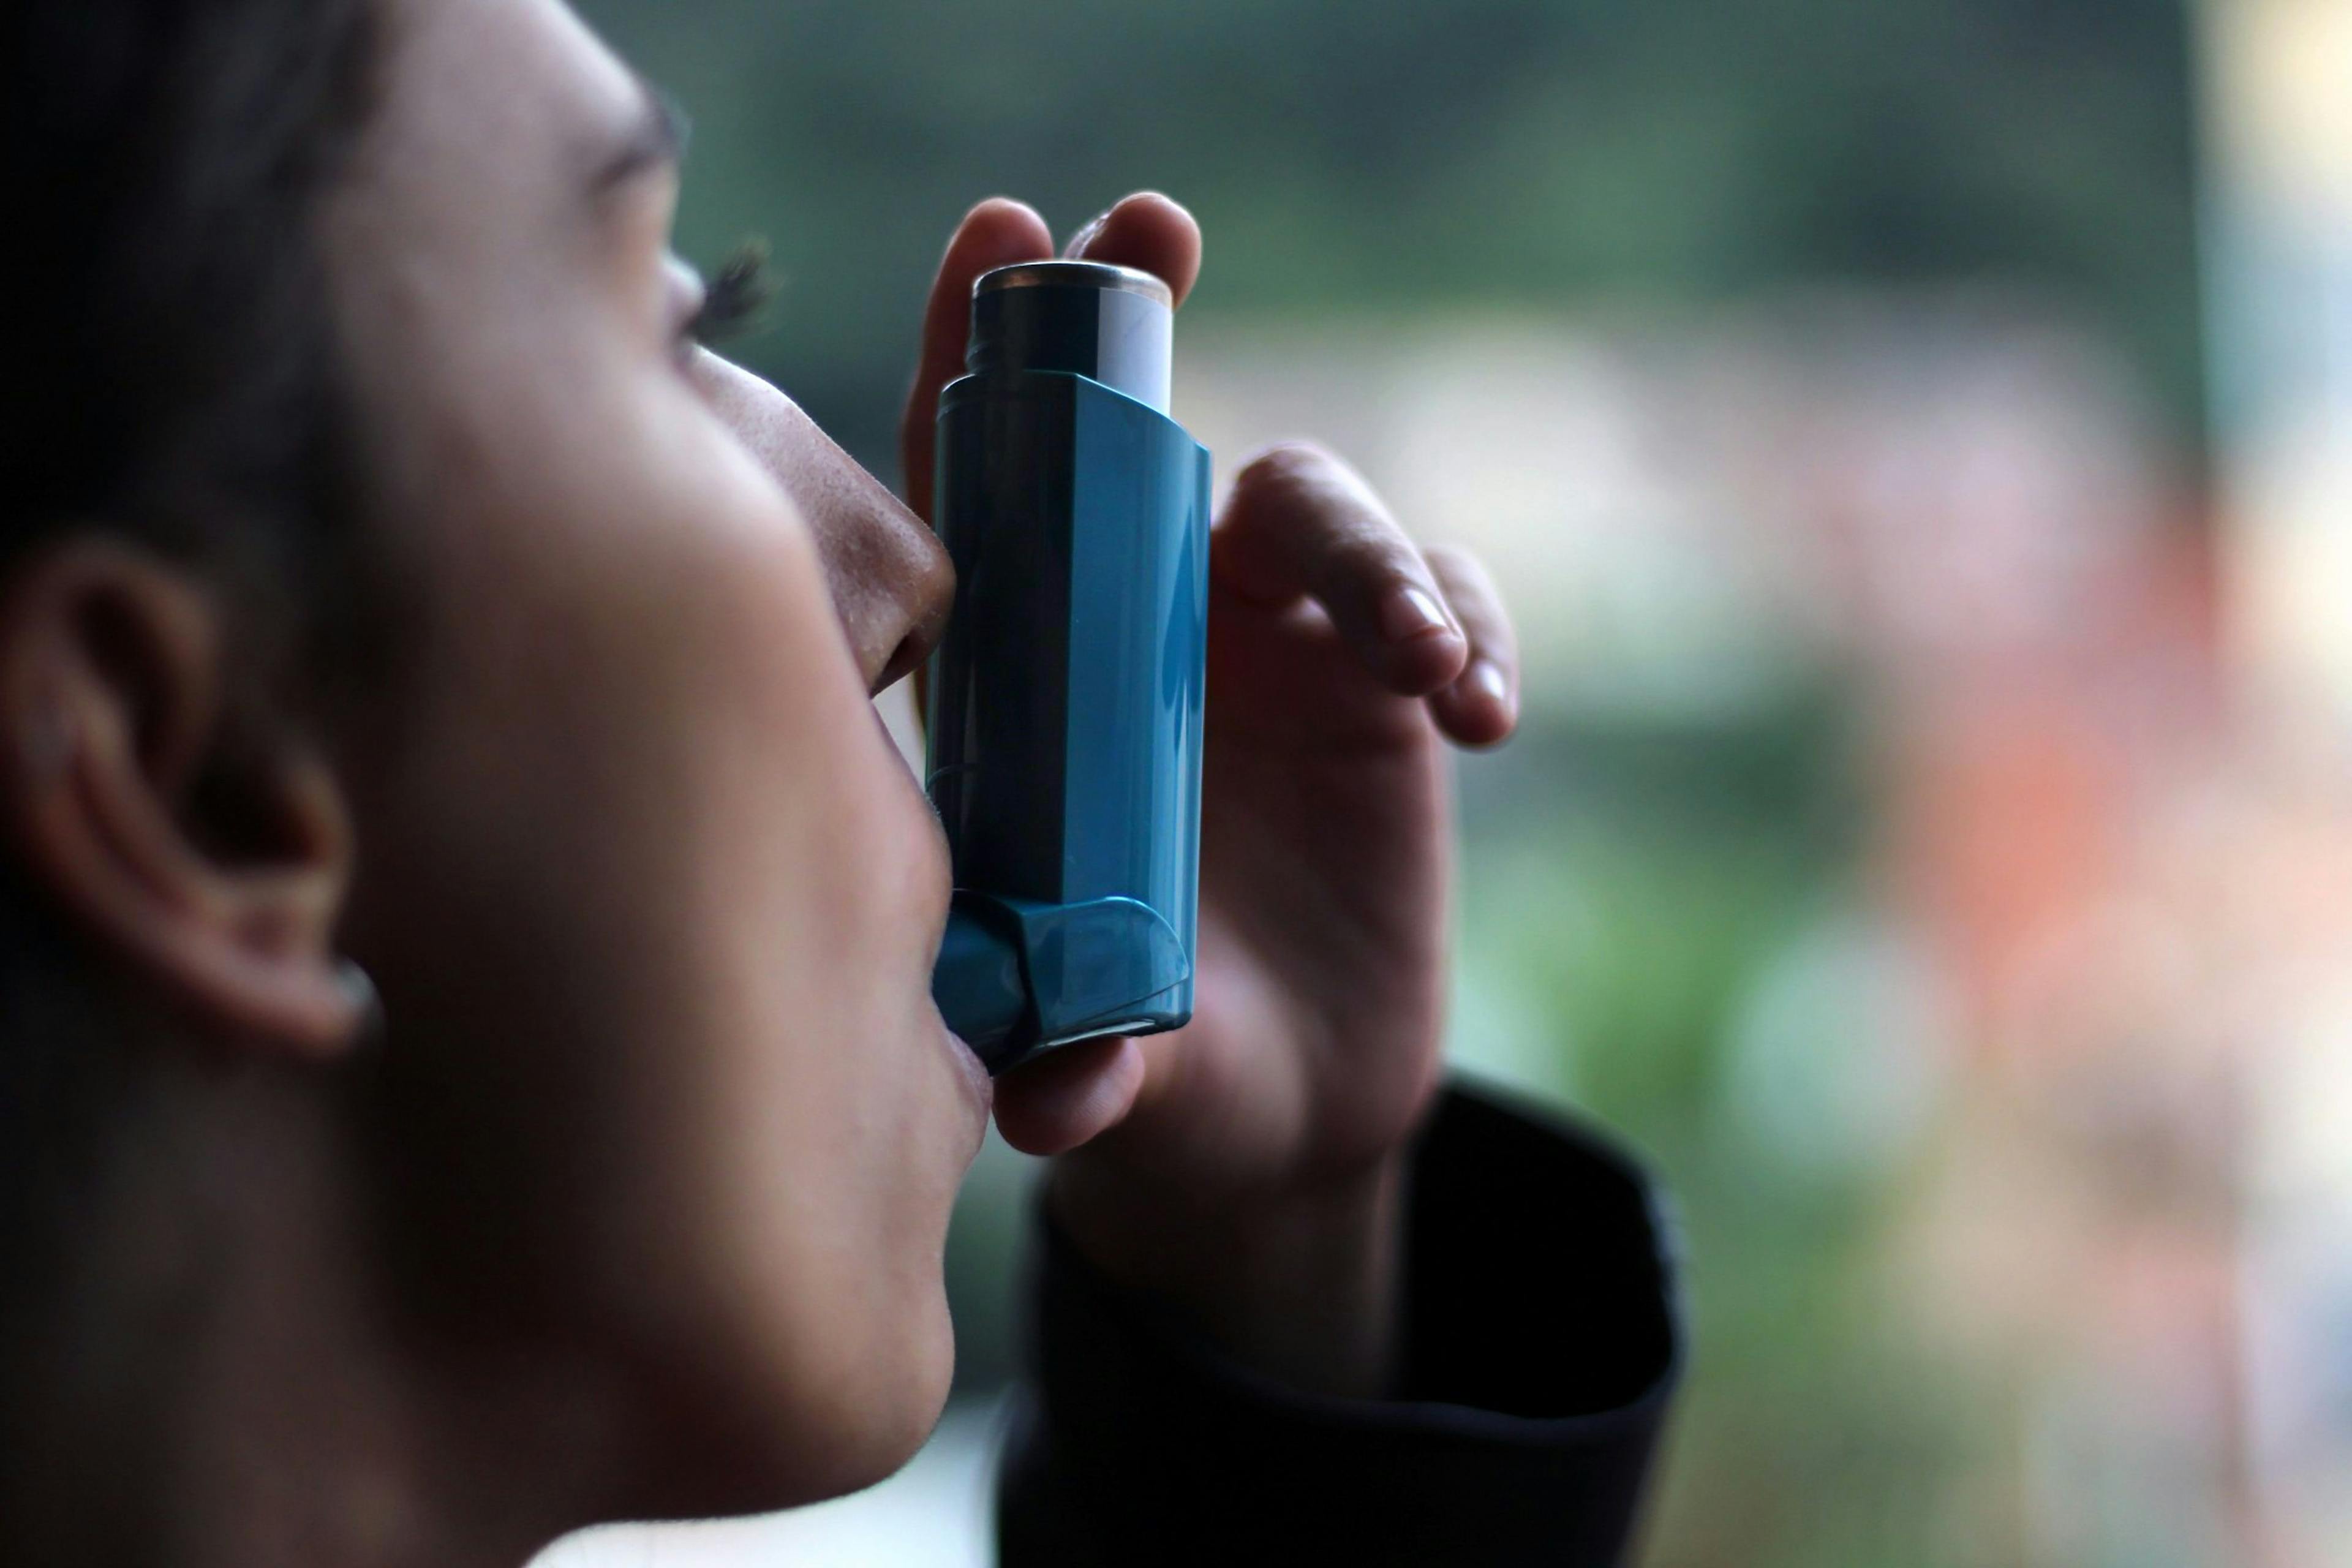 Health and medicine - Young girl using blue asthma inhaler to prevent an asthma attack. - Image credit: DALU11 | stock.adobe.com